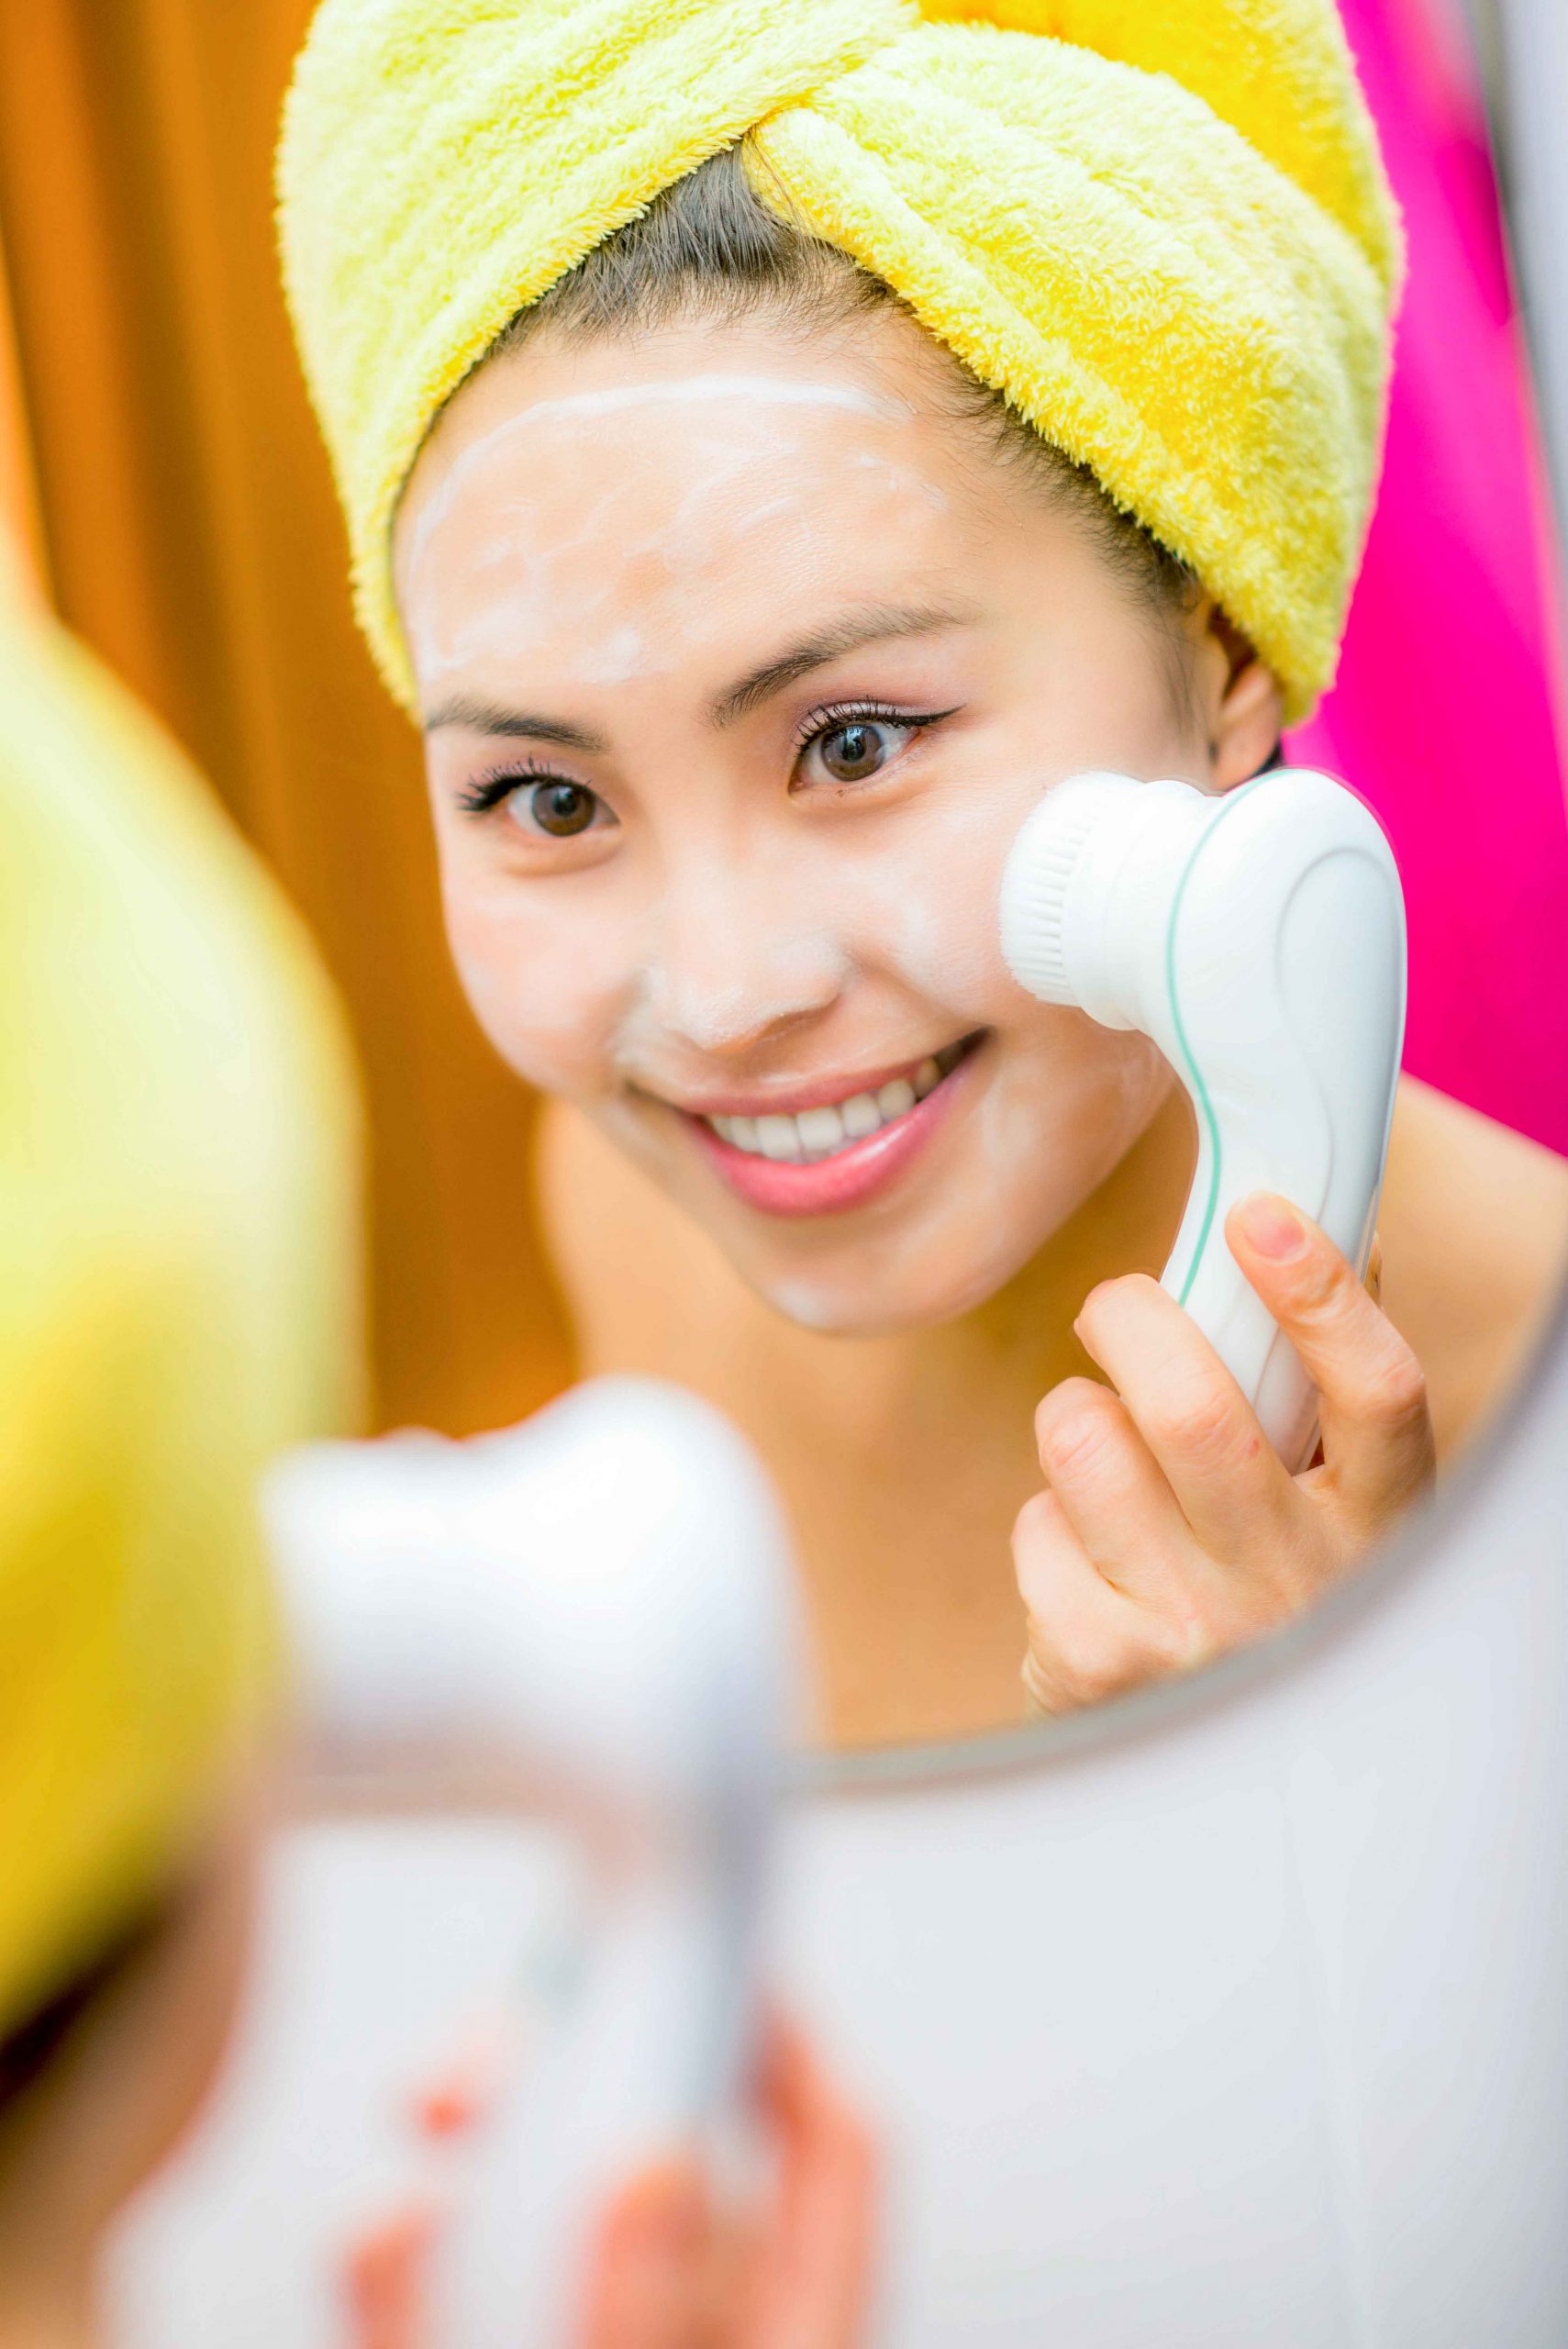 Can You Use A Clarisonic With Microbladed Eyebrows?